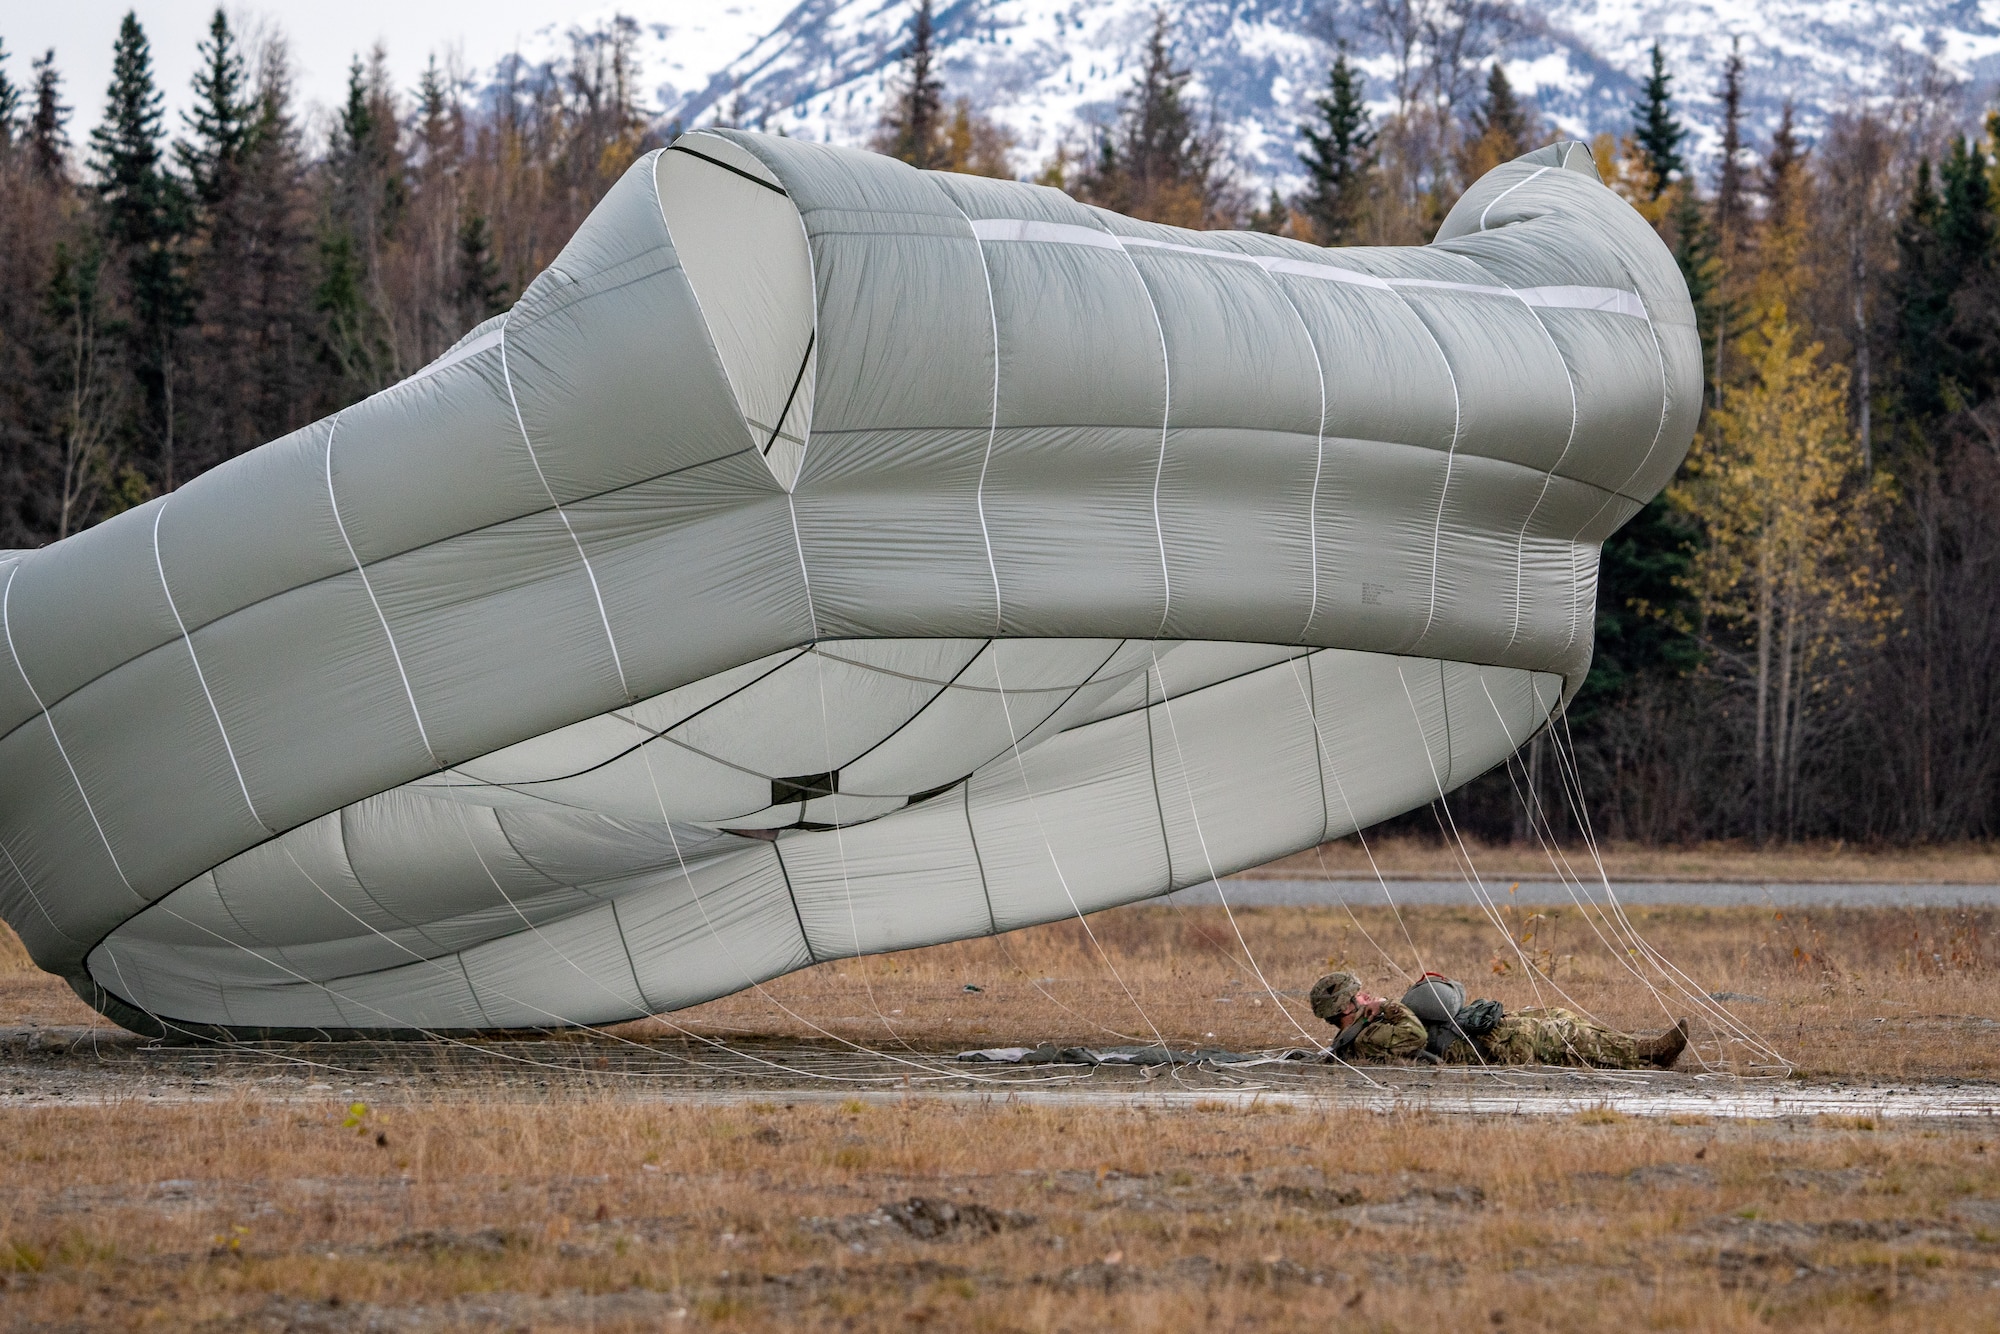 A U.S. Army paratrooper assigned to the 1st Squadron (Airborne), 40th Cavalry Regiment, 4th Infantry Brigade Combat Team (Airborne), 25th Infantry Division, U.S. Army Alaska, lands after jumping from a CH-47 Chinook